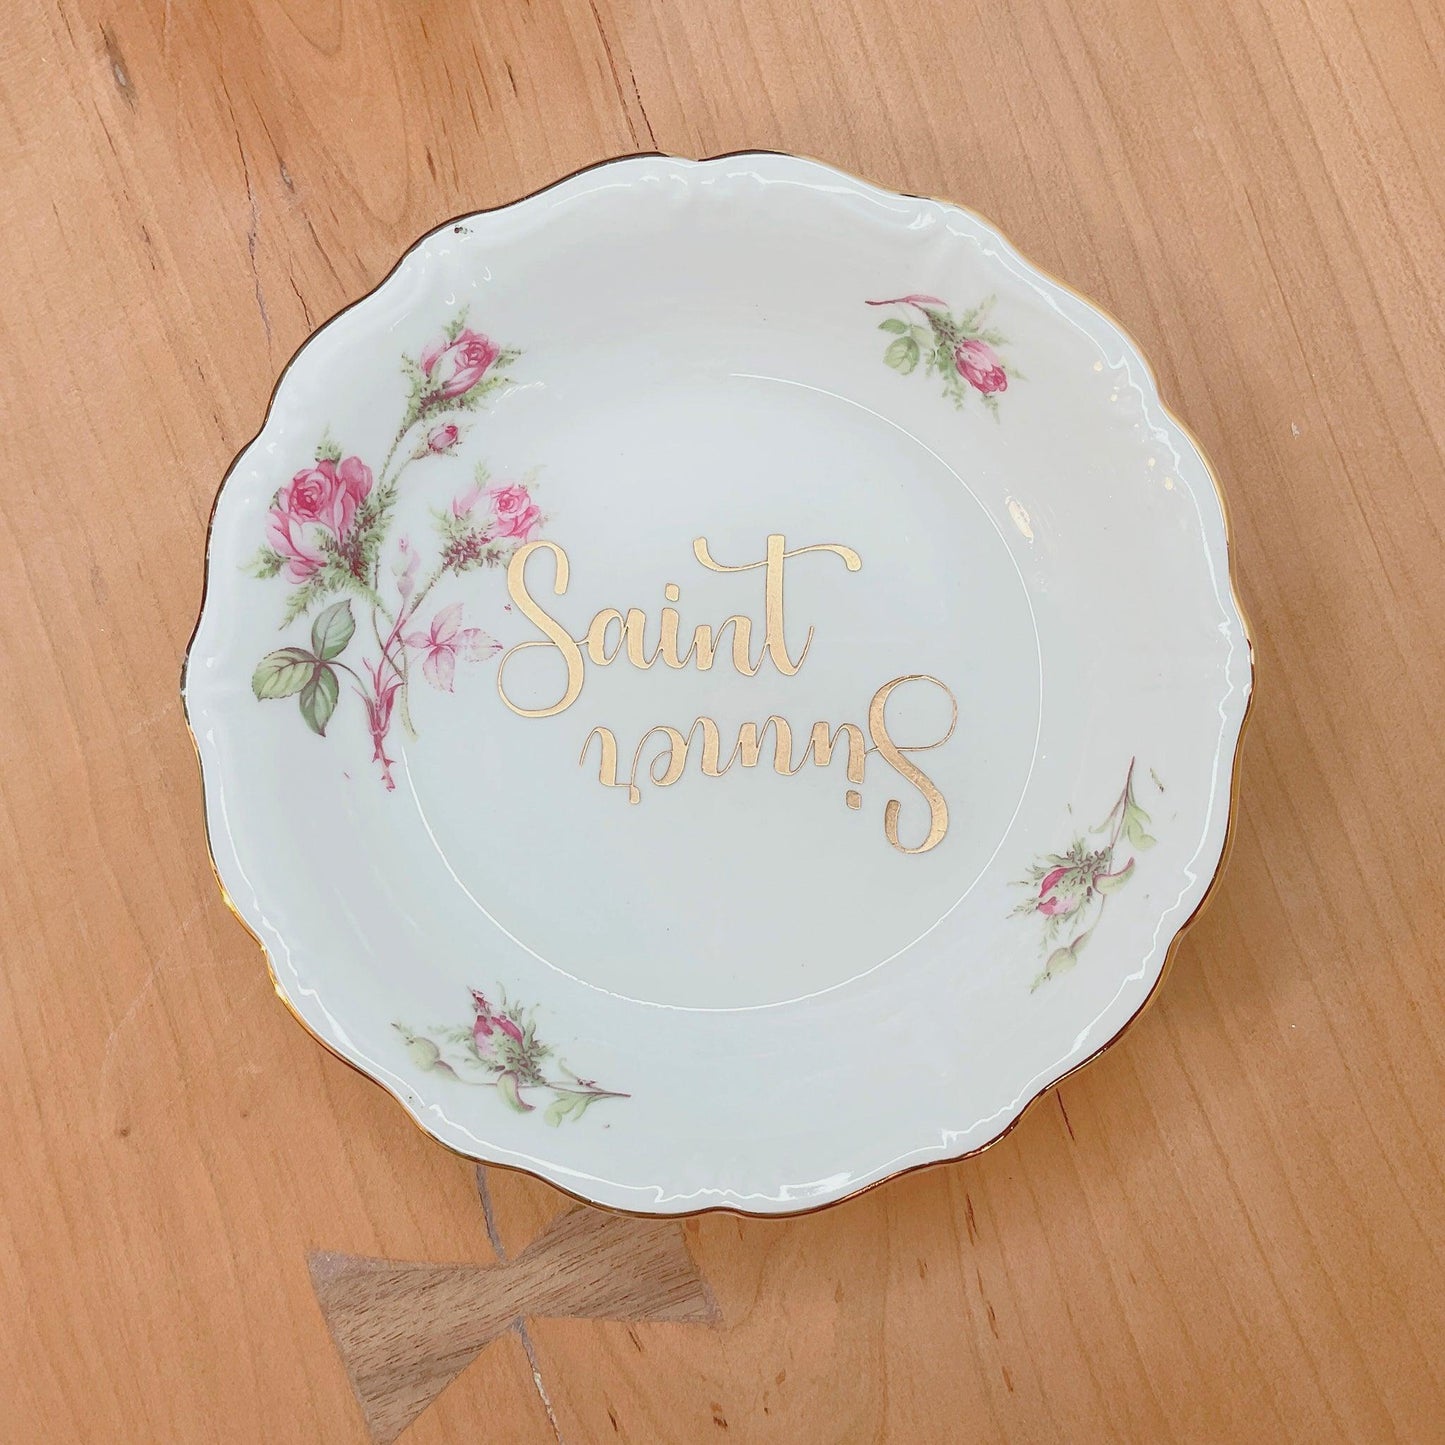 Sinner / Saint Candy Dish - Offensively Domestic